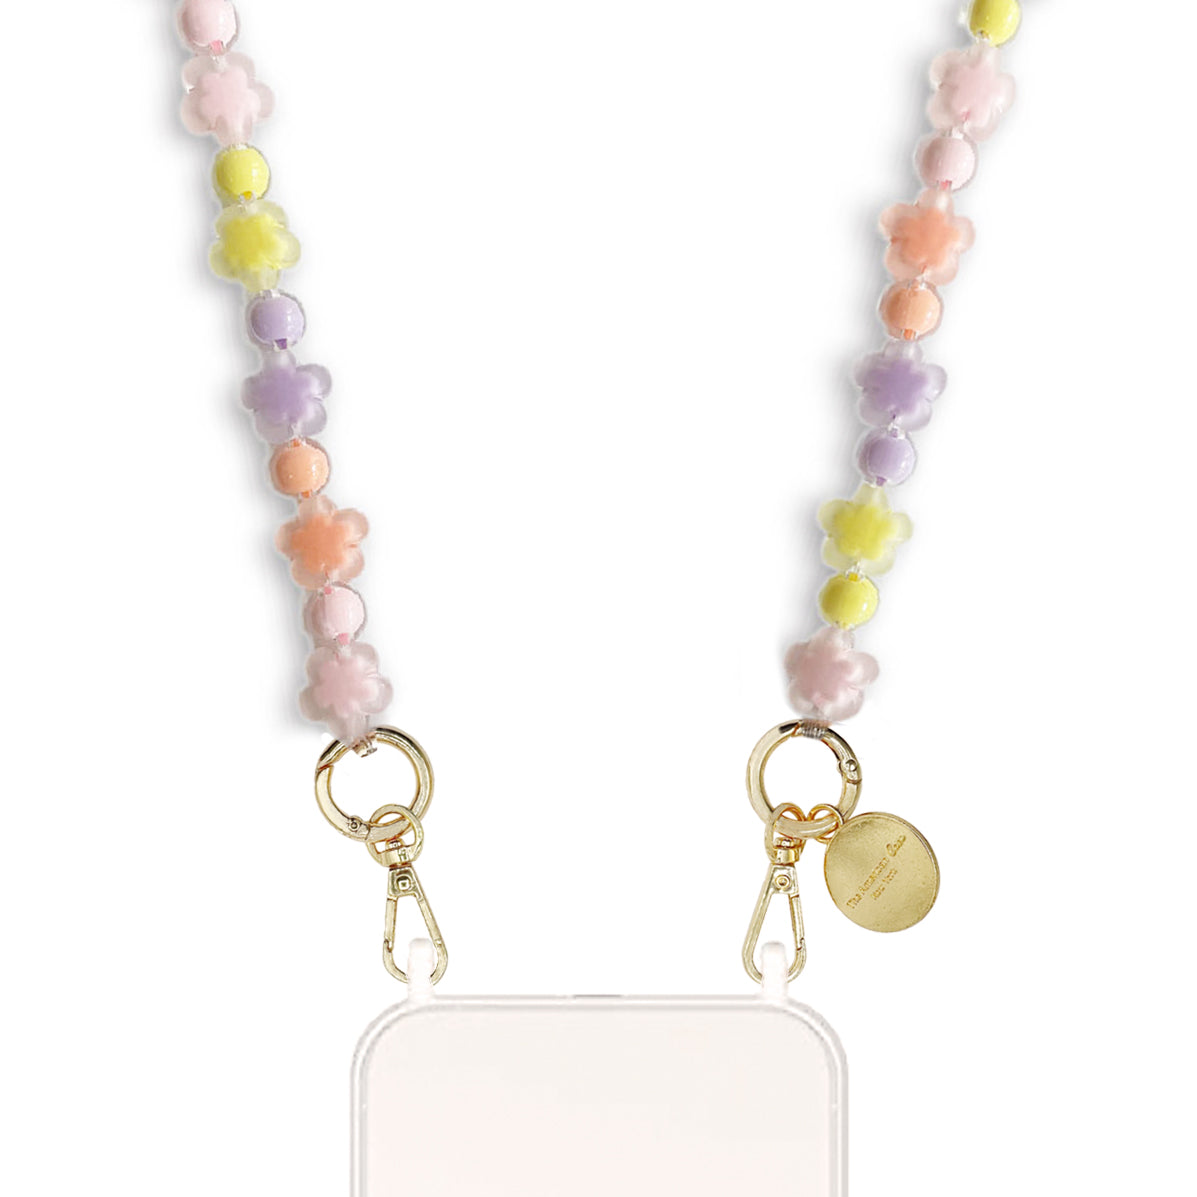 Elina - Crossbody Pastel Flower Bead Phone Chain with Golden Carabiners